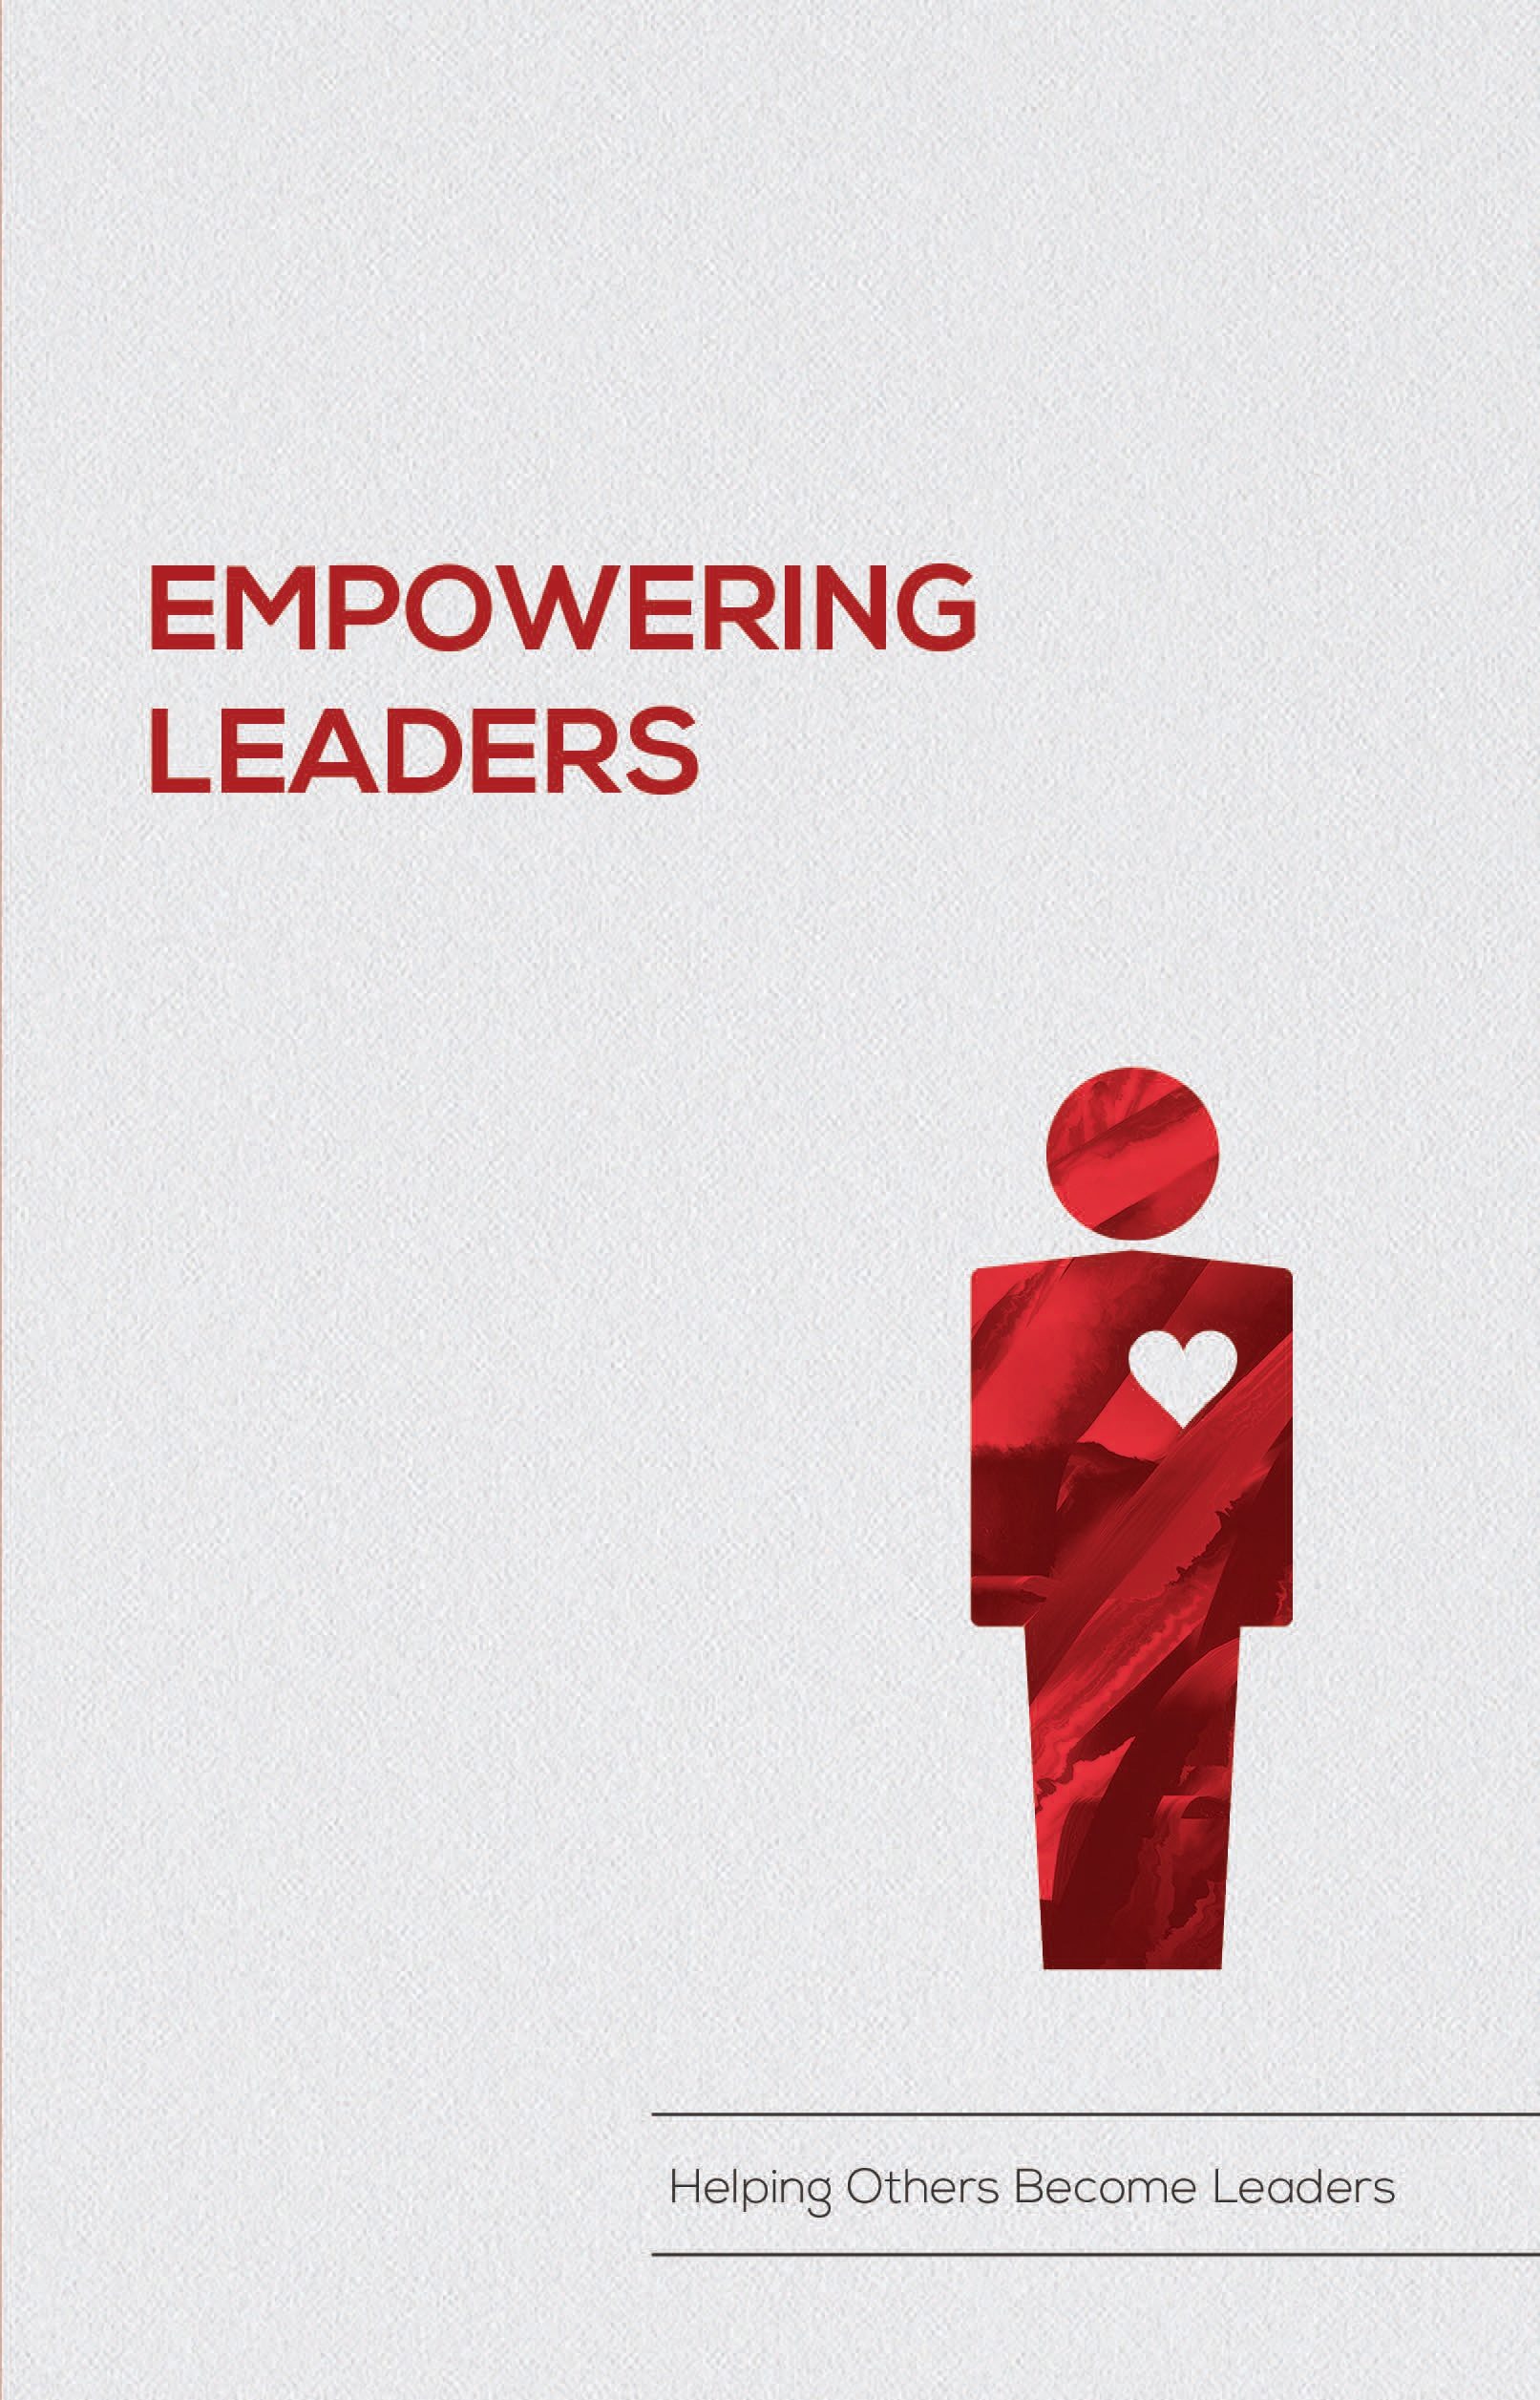 Empowering Leaders: Helping Others Become Leaders-image